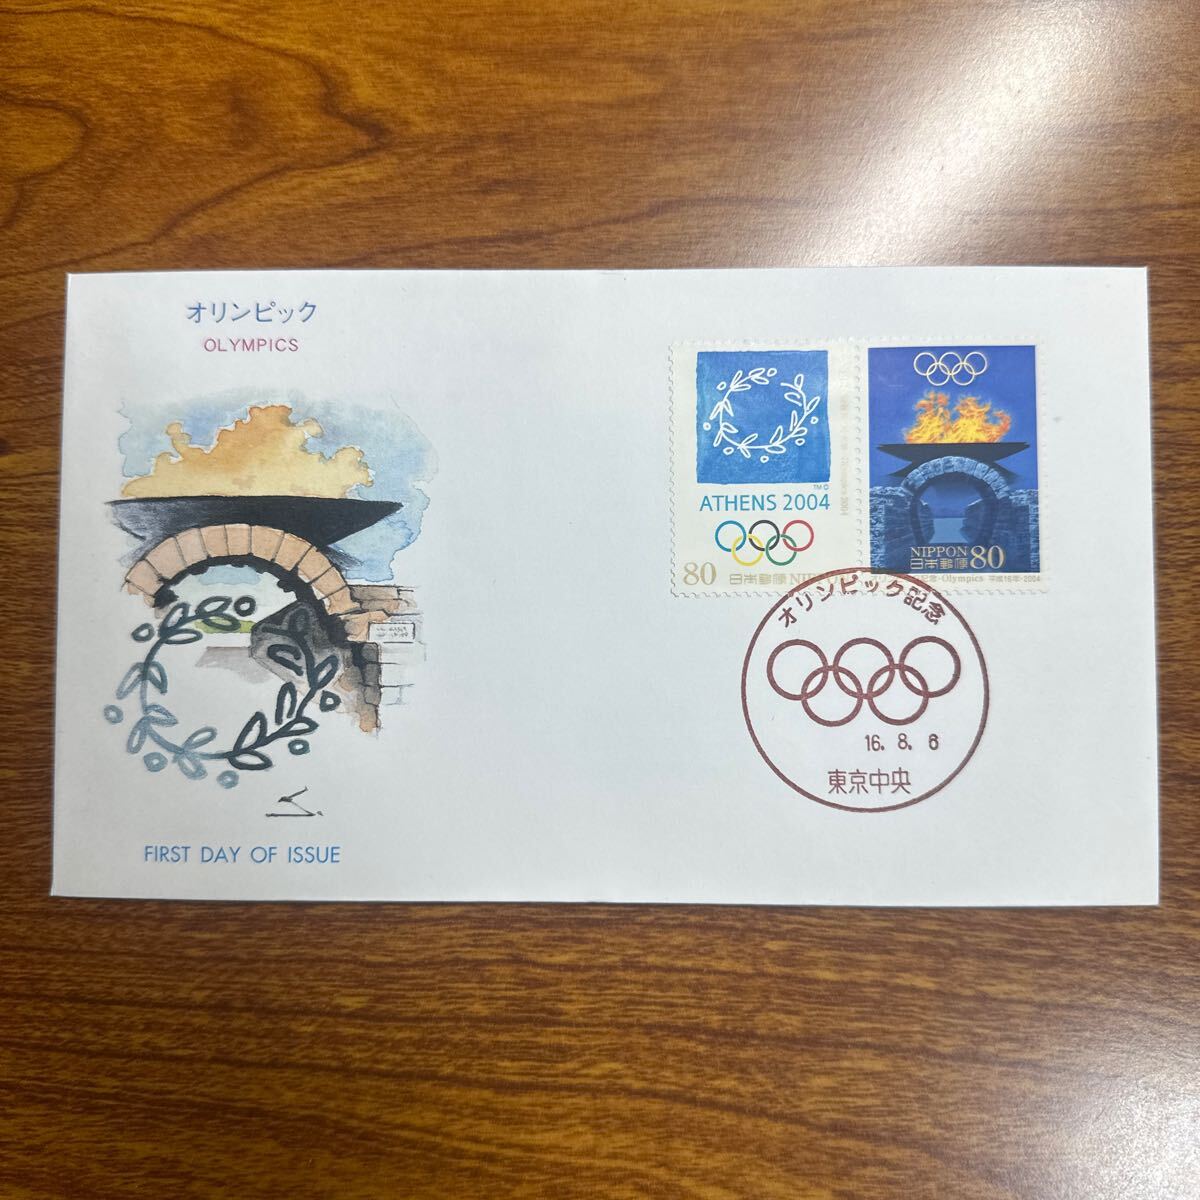  First Day Cover Olympic Heisei era 16 year issue memory seal 